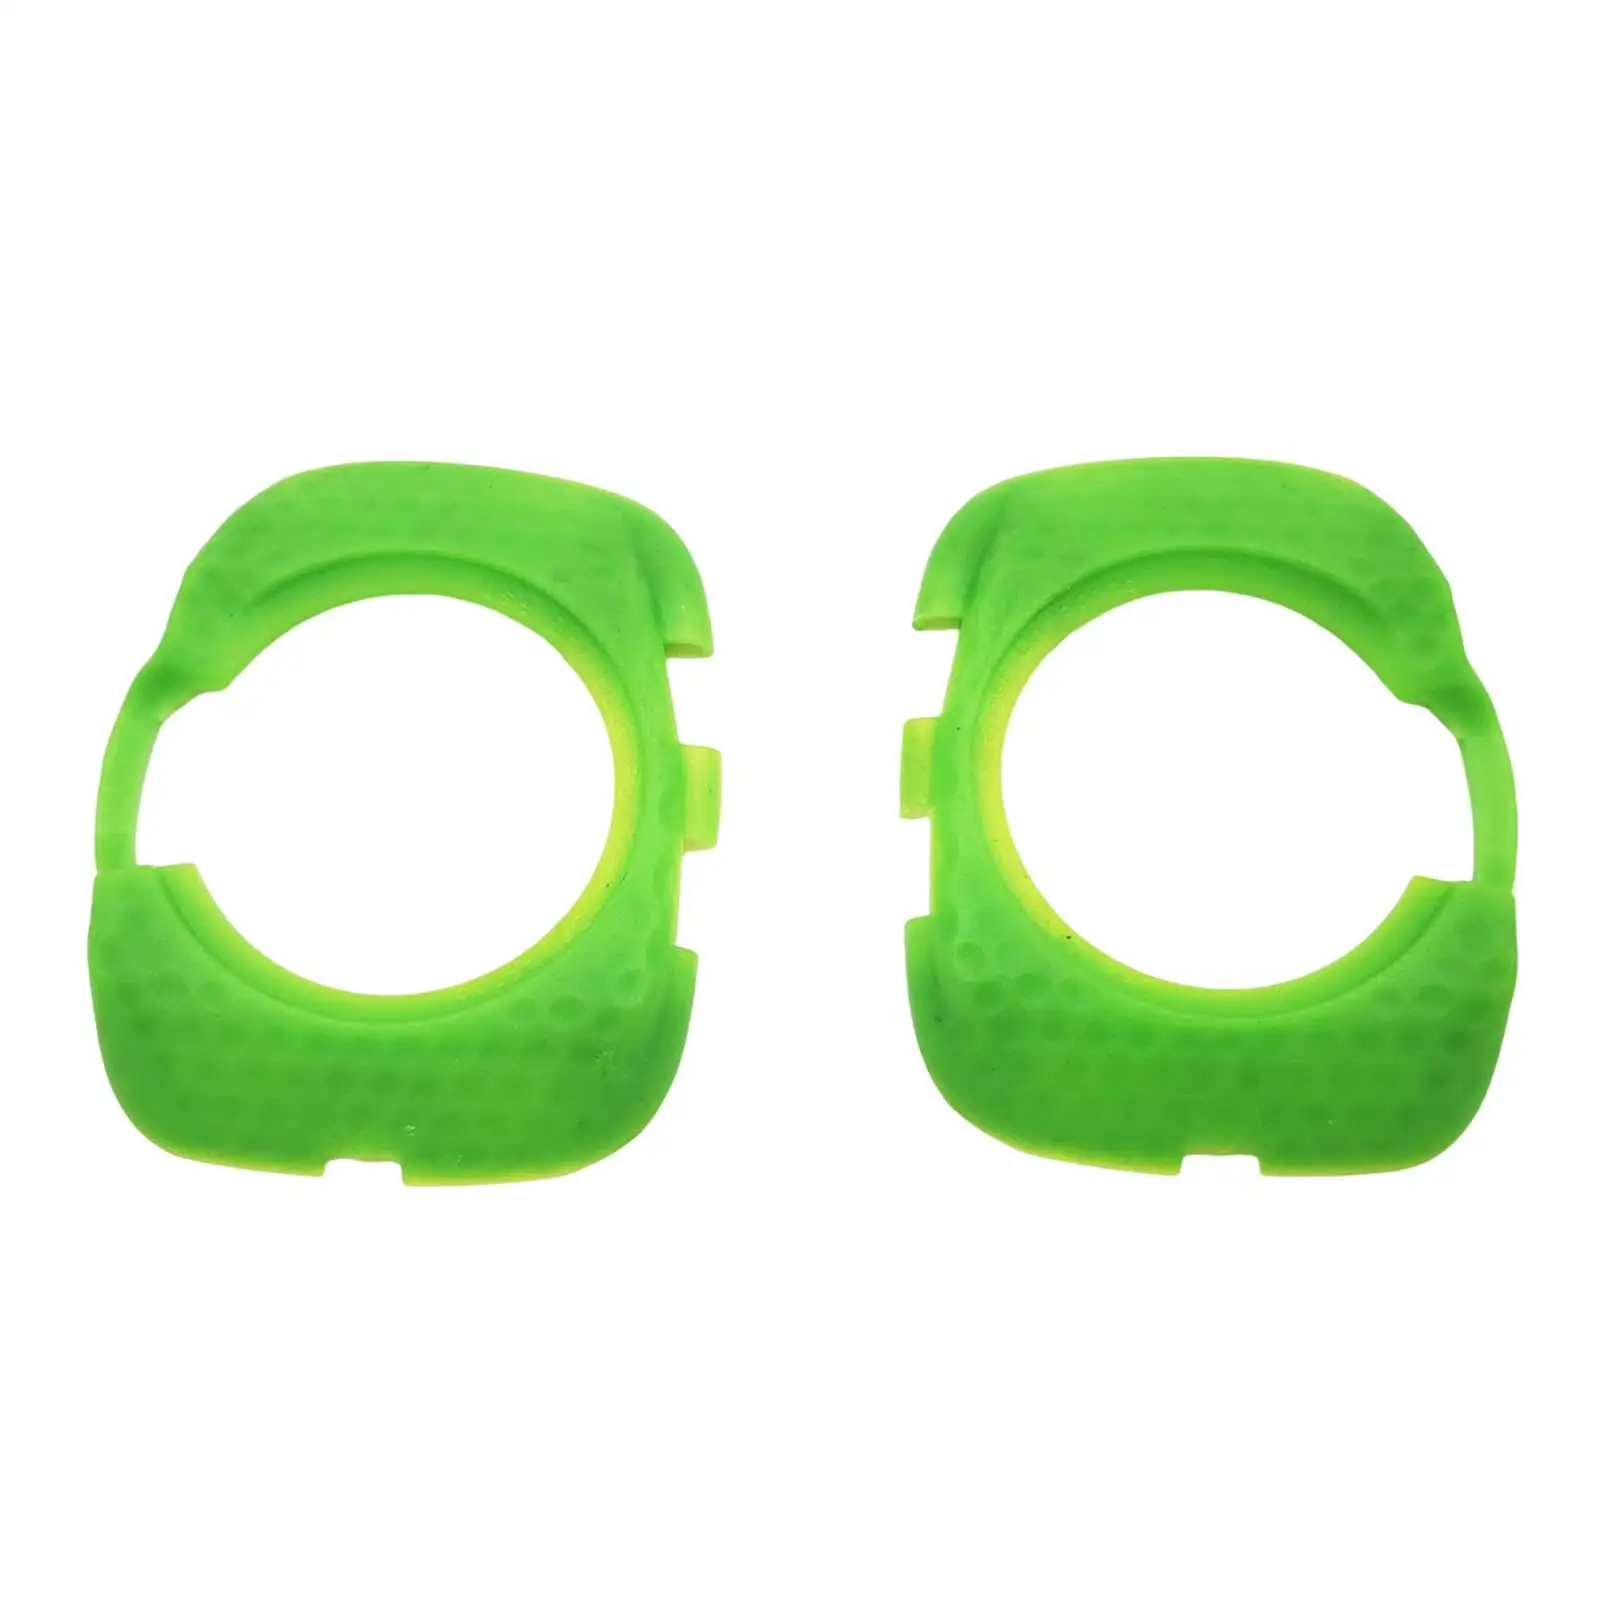 2 Pieces Bicycle Cleat Cover Bike Accessories Road Bike TPU Protective Cover